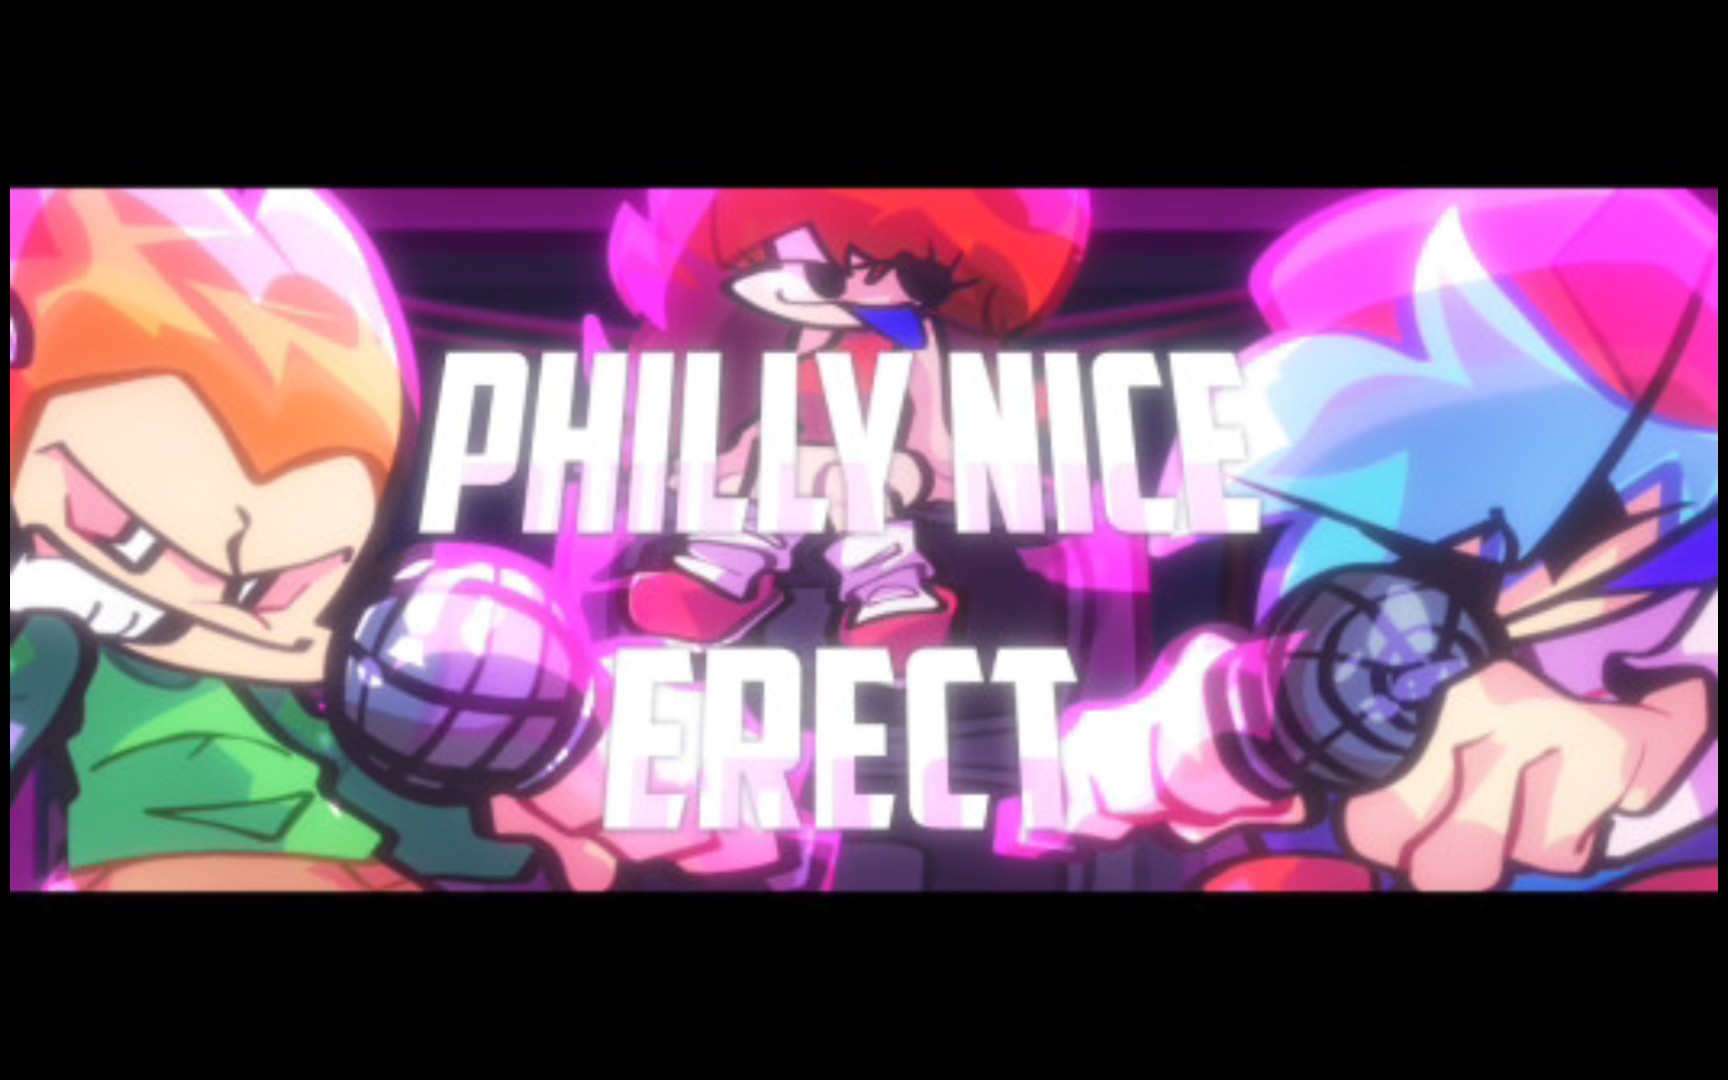 FNF - Philly Nice Fanmade Erect (High Effort) Charted（光流补帧＋纯享＋优化）